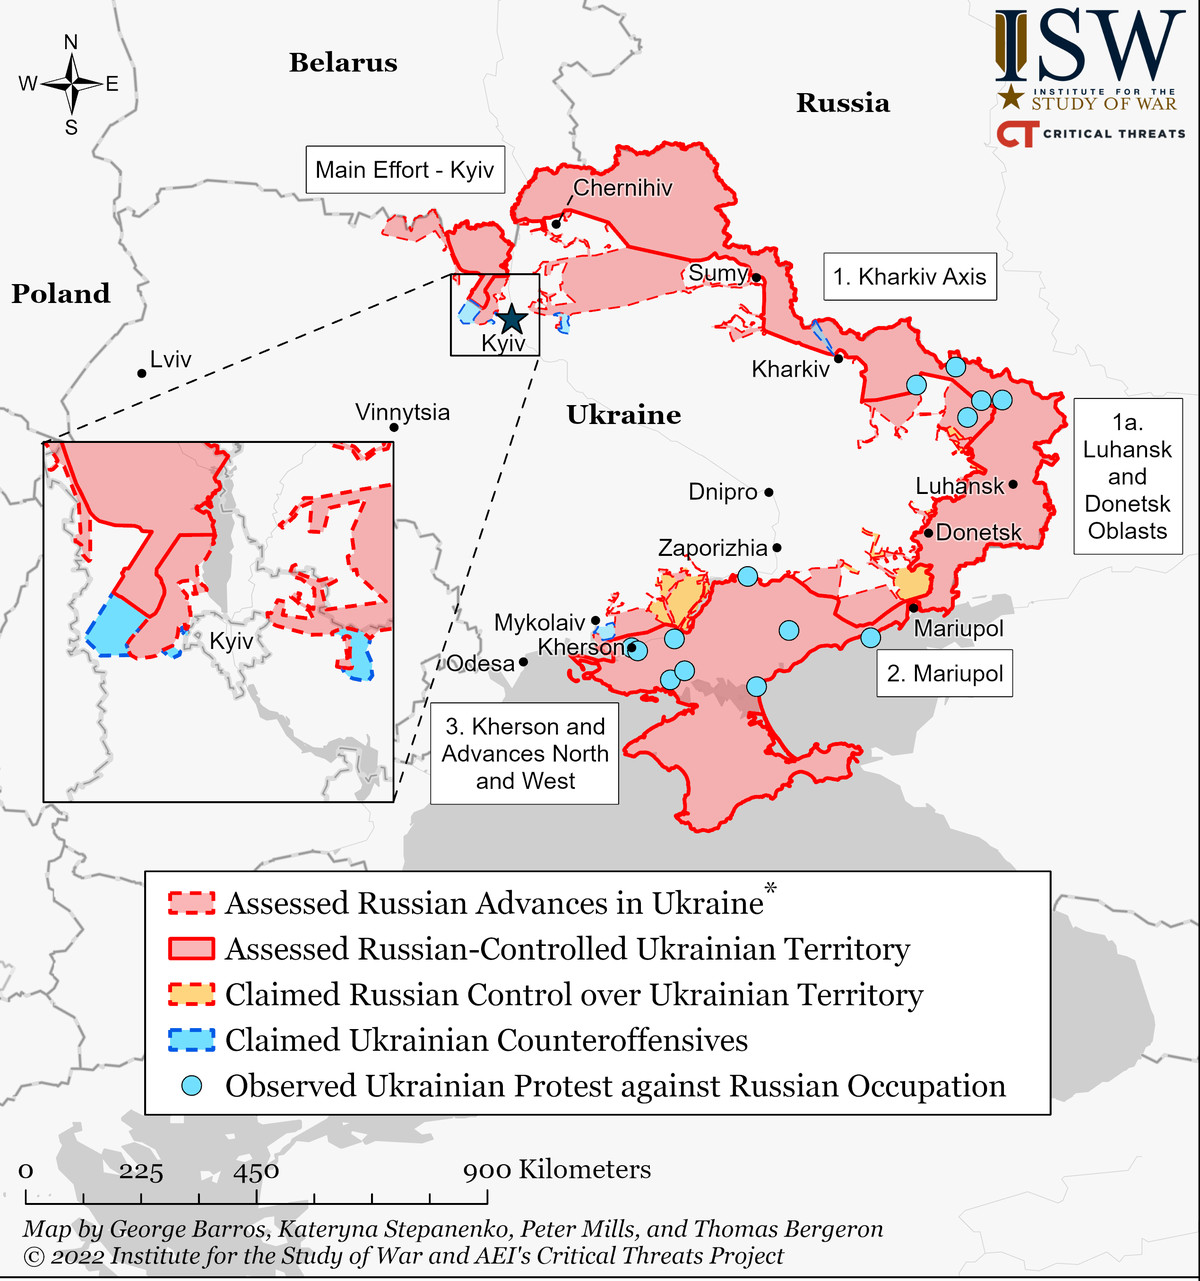 The new phase of the war in Ukraine, explained